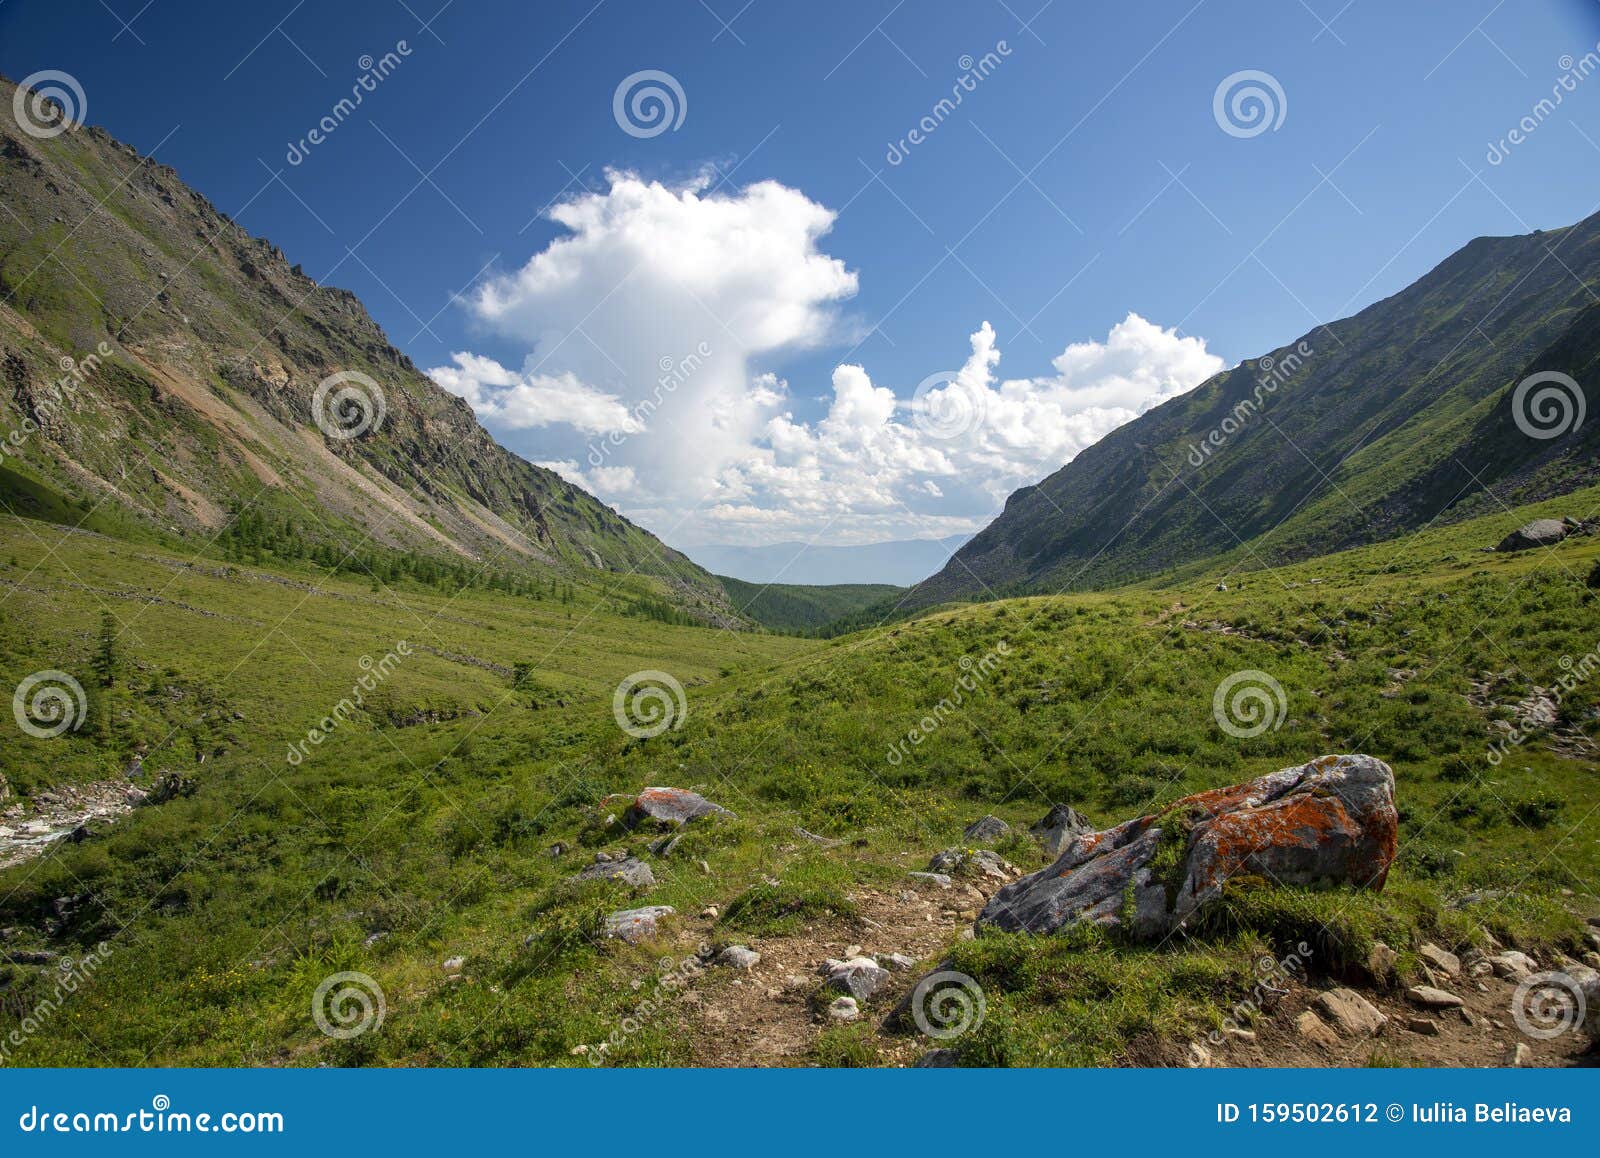 the mountain ranges of satan and hamar-daban. mountain peaks and valleys. mountain landscape.